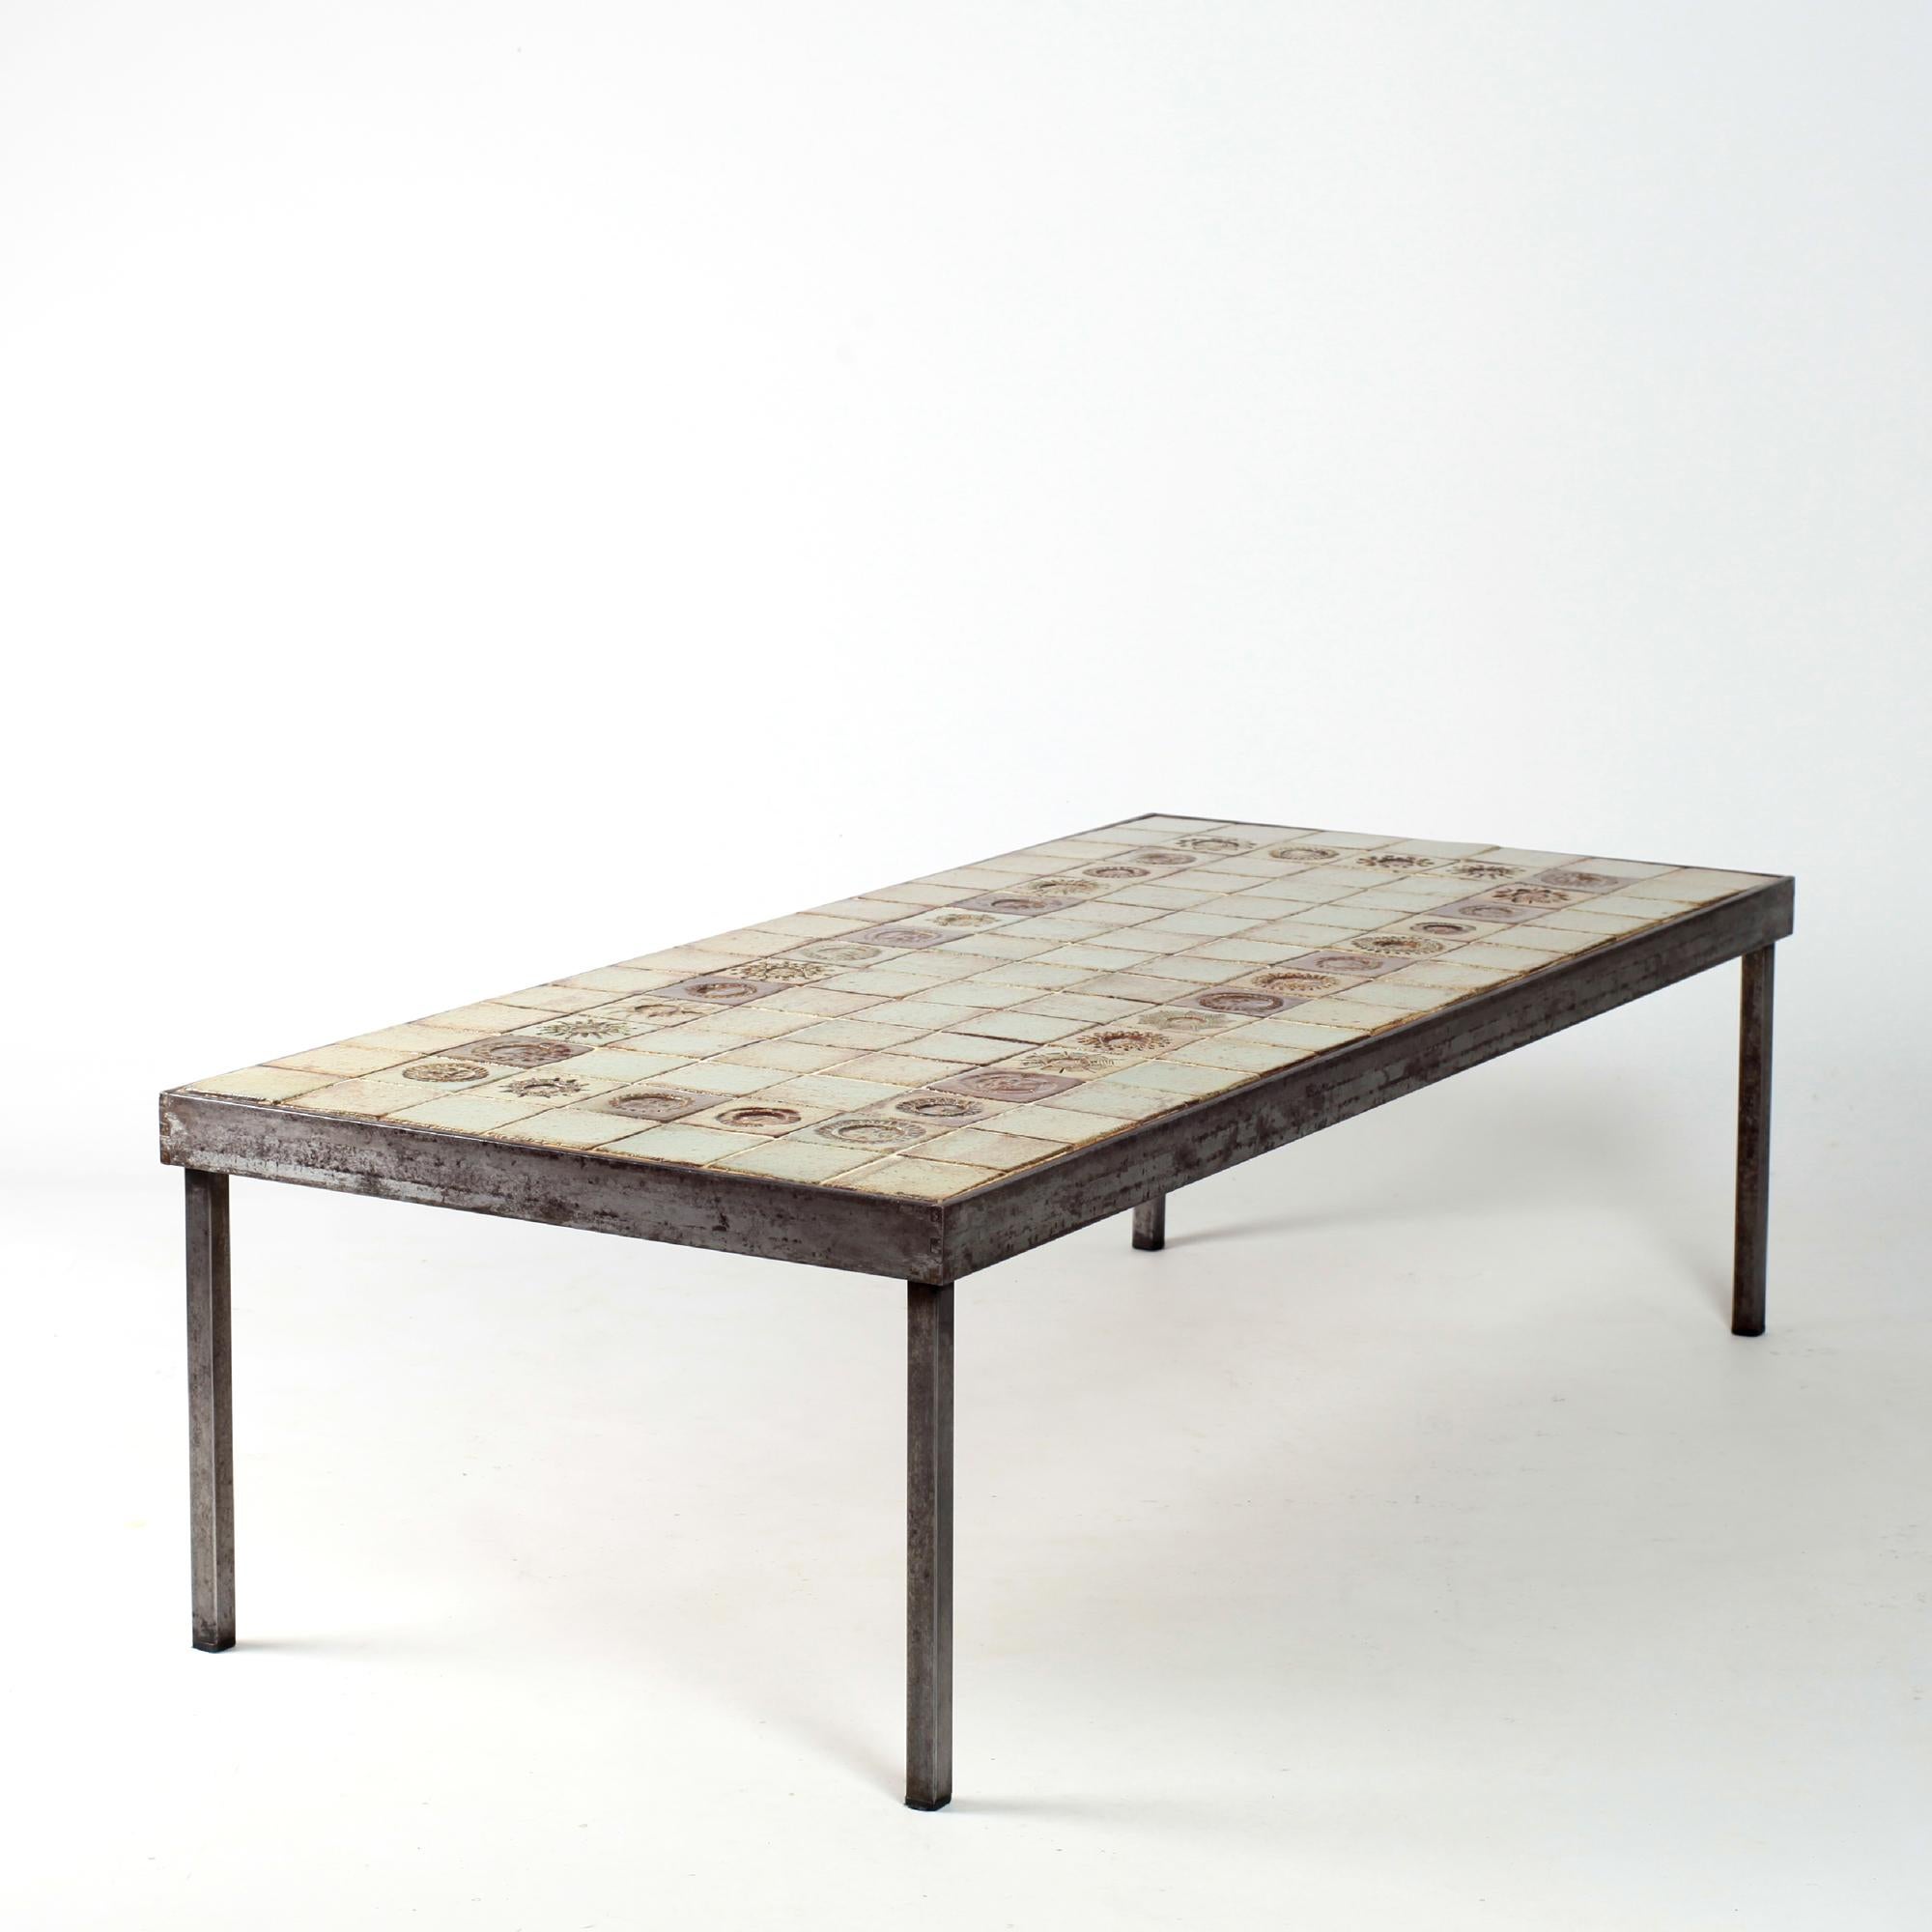 20th Century Roger Capron Large Ceramic Coffee Table France Vallauris, 1960